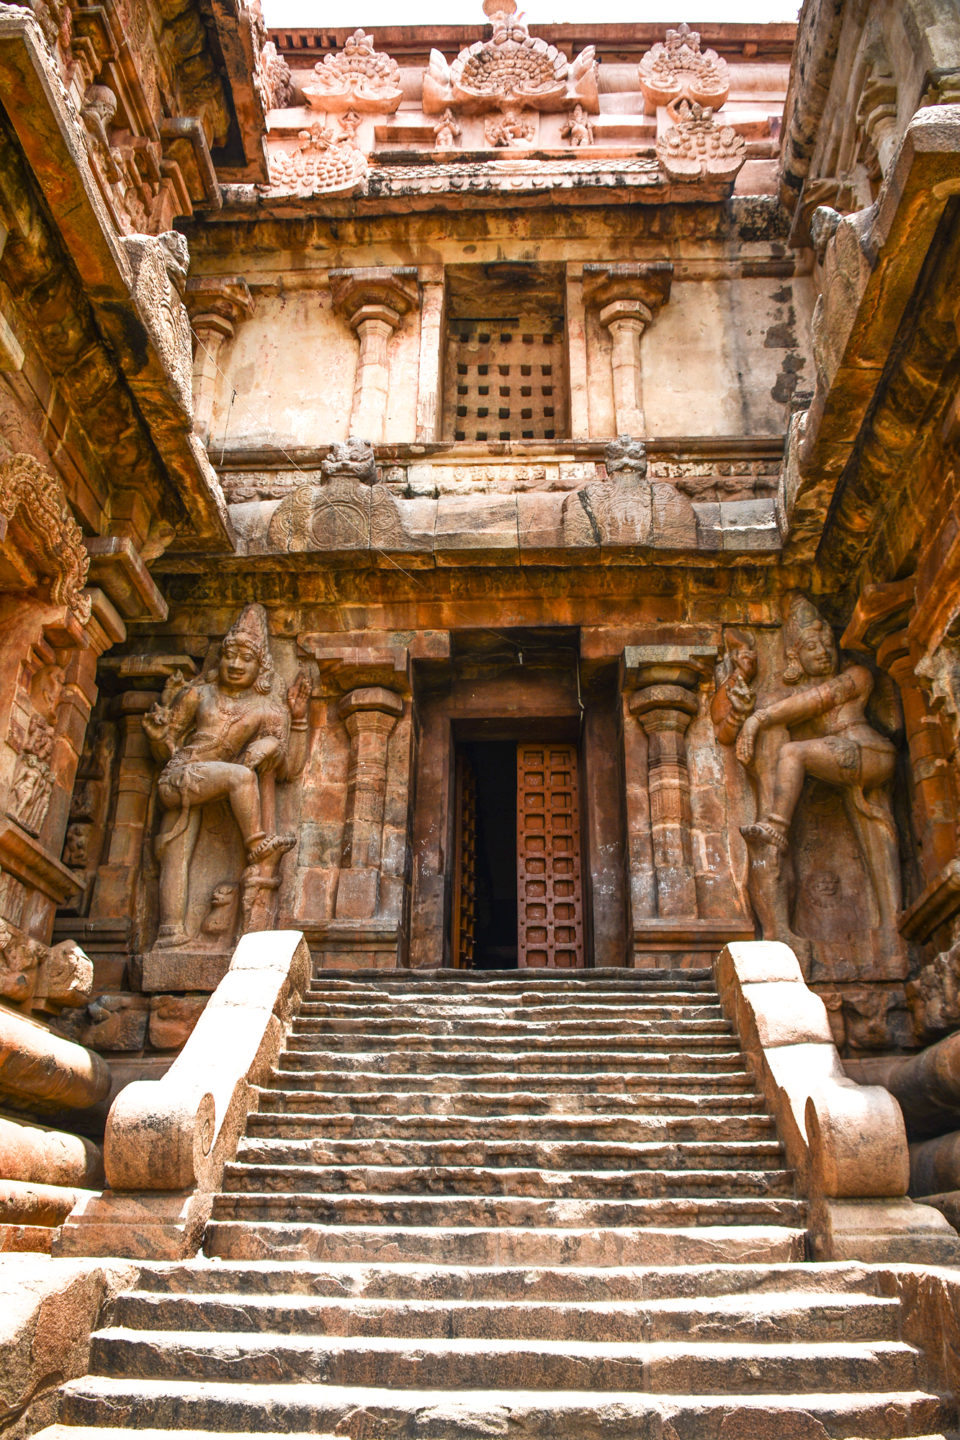 One of the temple entrances guarded by Dwarabalas